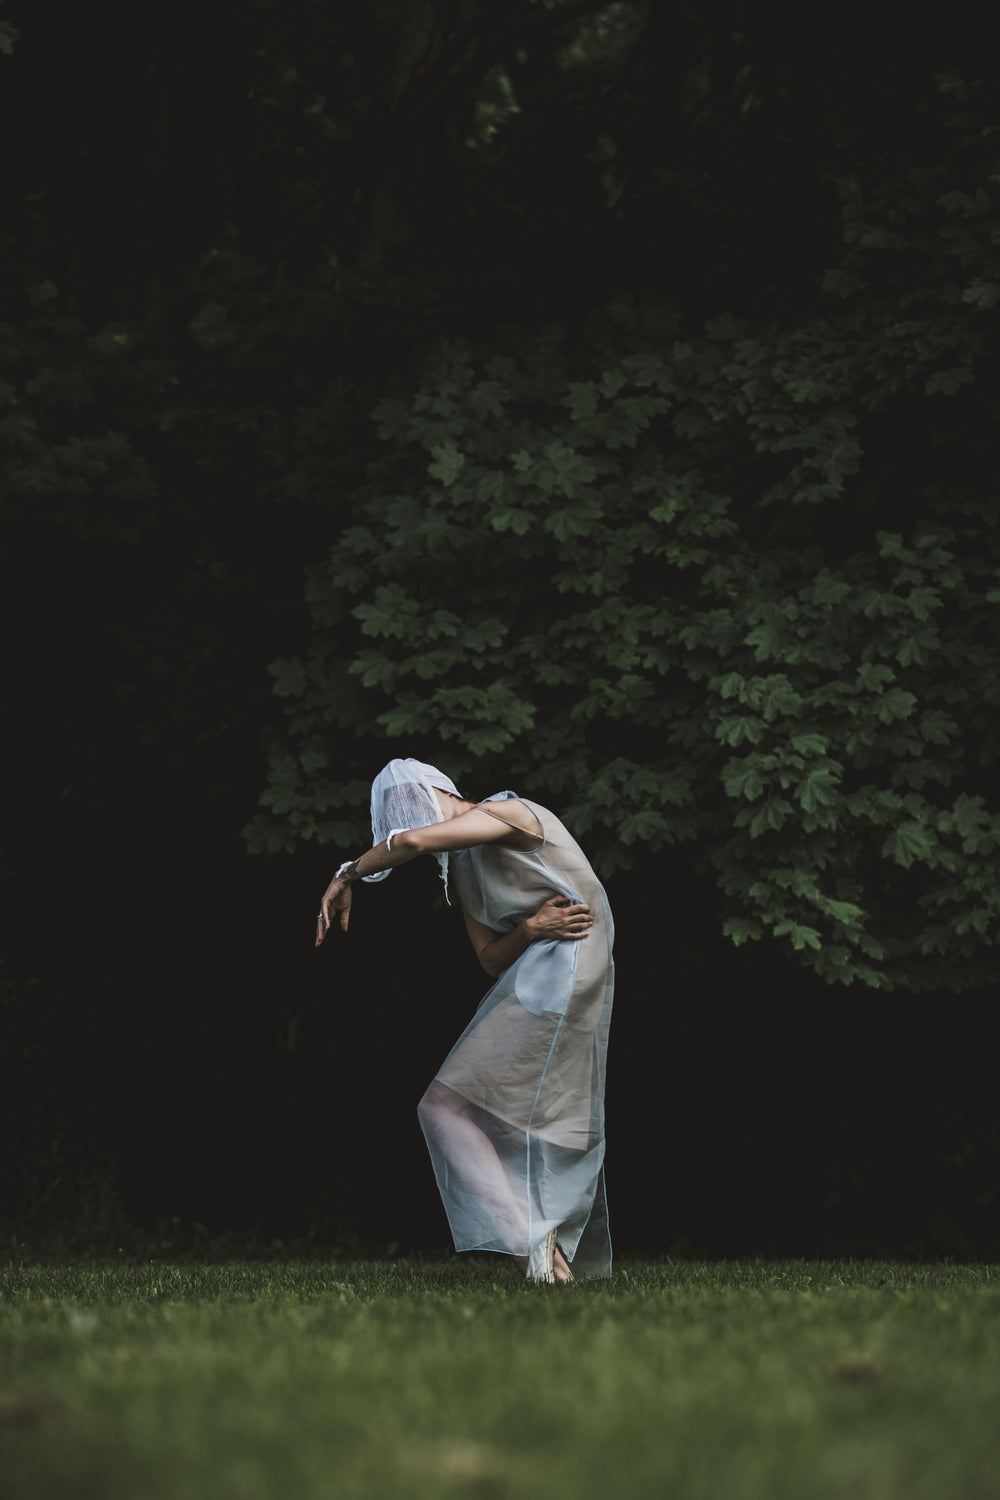 a person in white netting strikes a pose in the woods